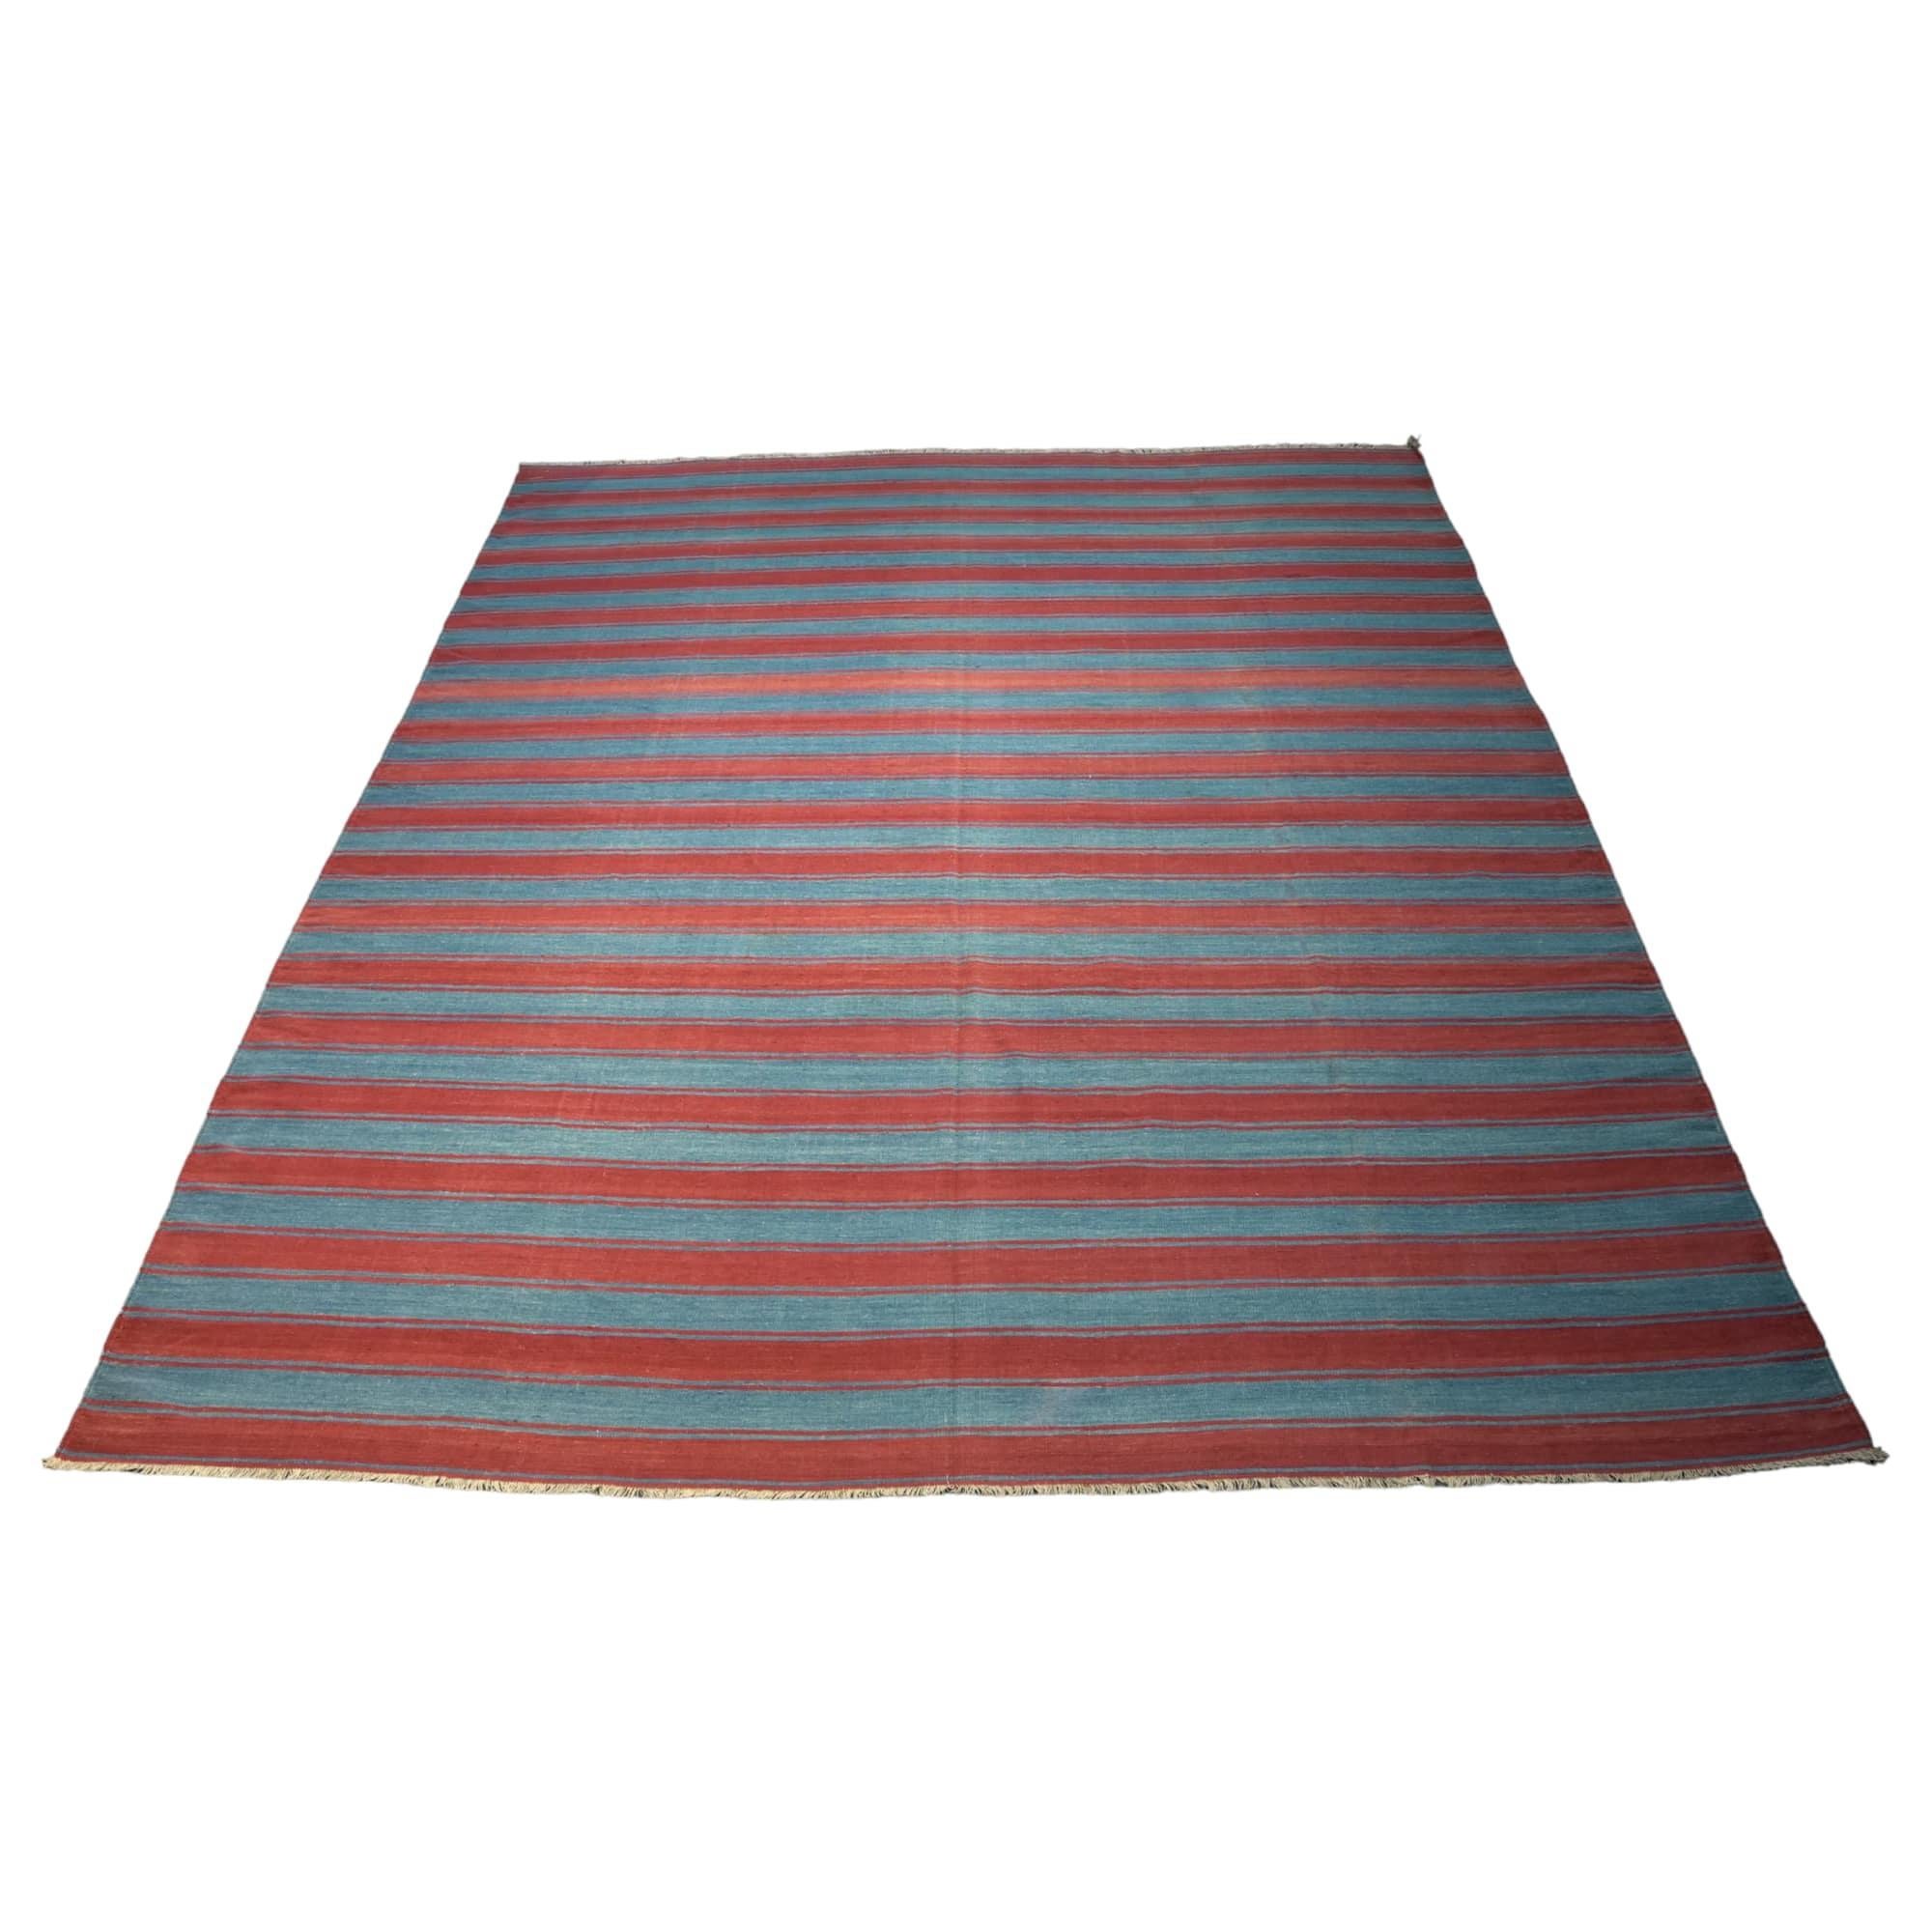 Vintage Dhurrie Rug, with Red and Blue Stripes, from Rug & Kilim For Sale